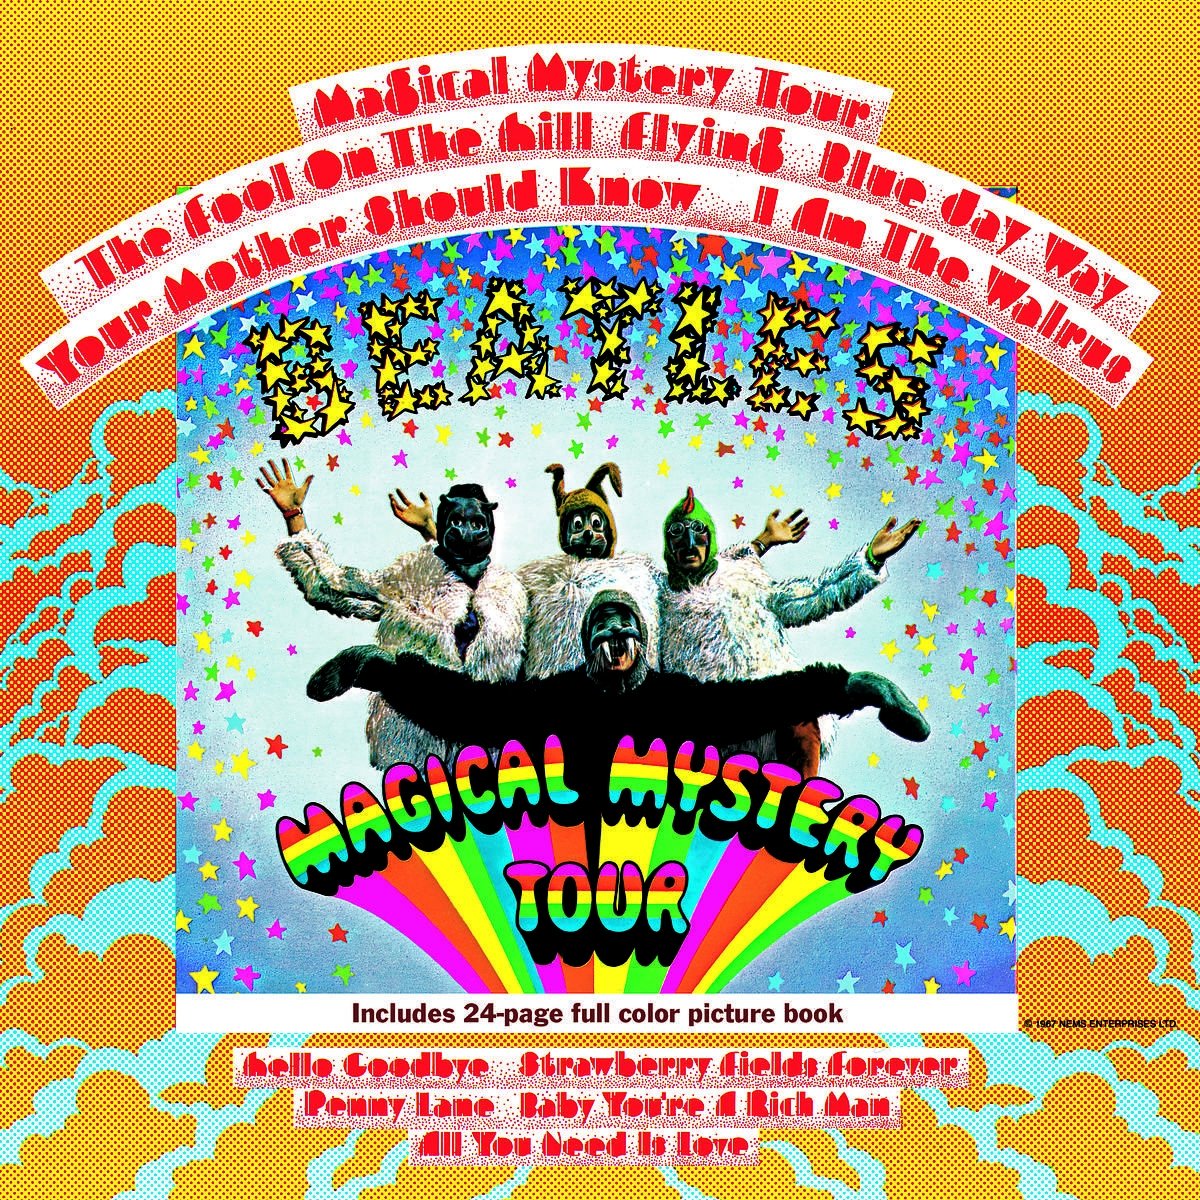 Beatles, The/Magical Mystery Tour [LP]